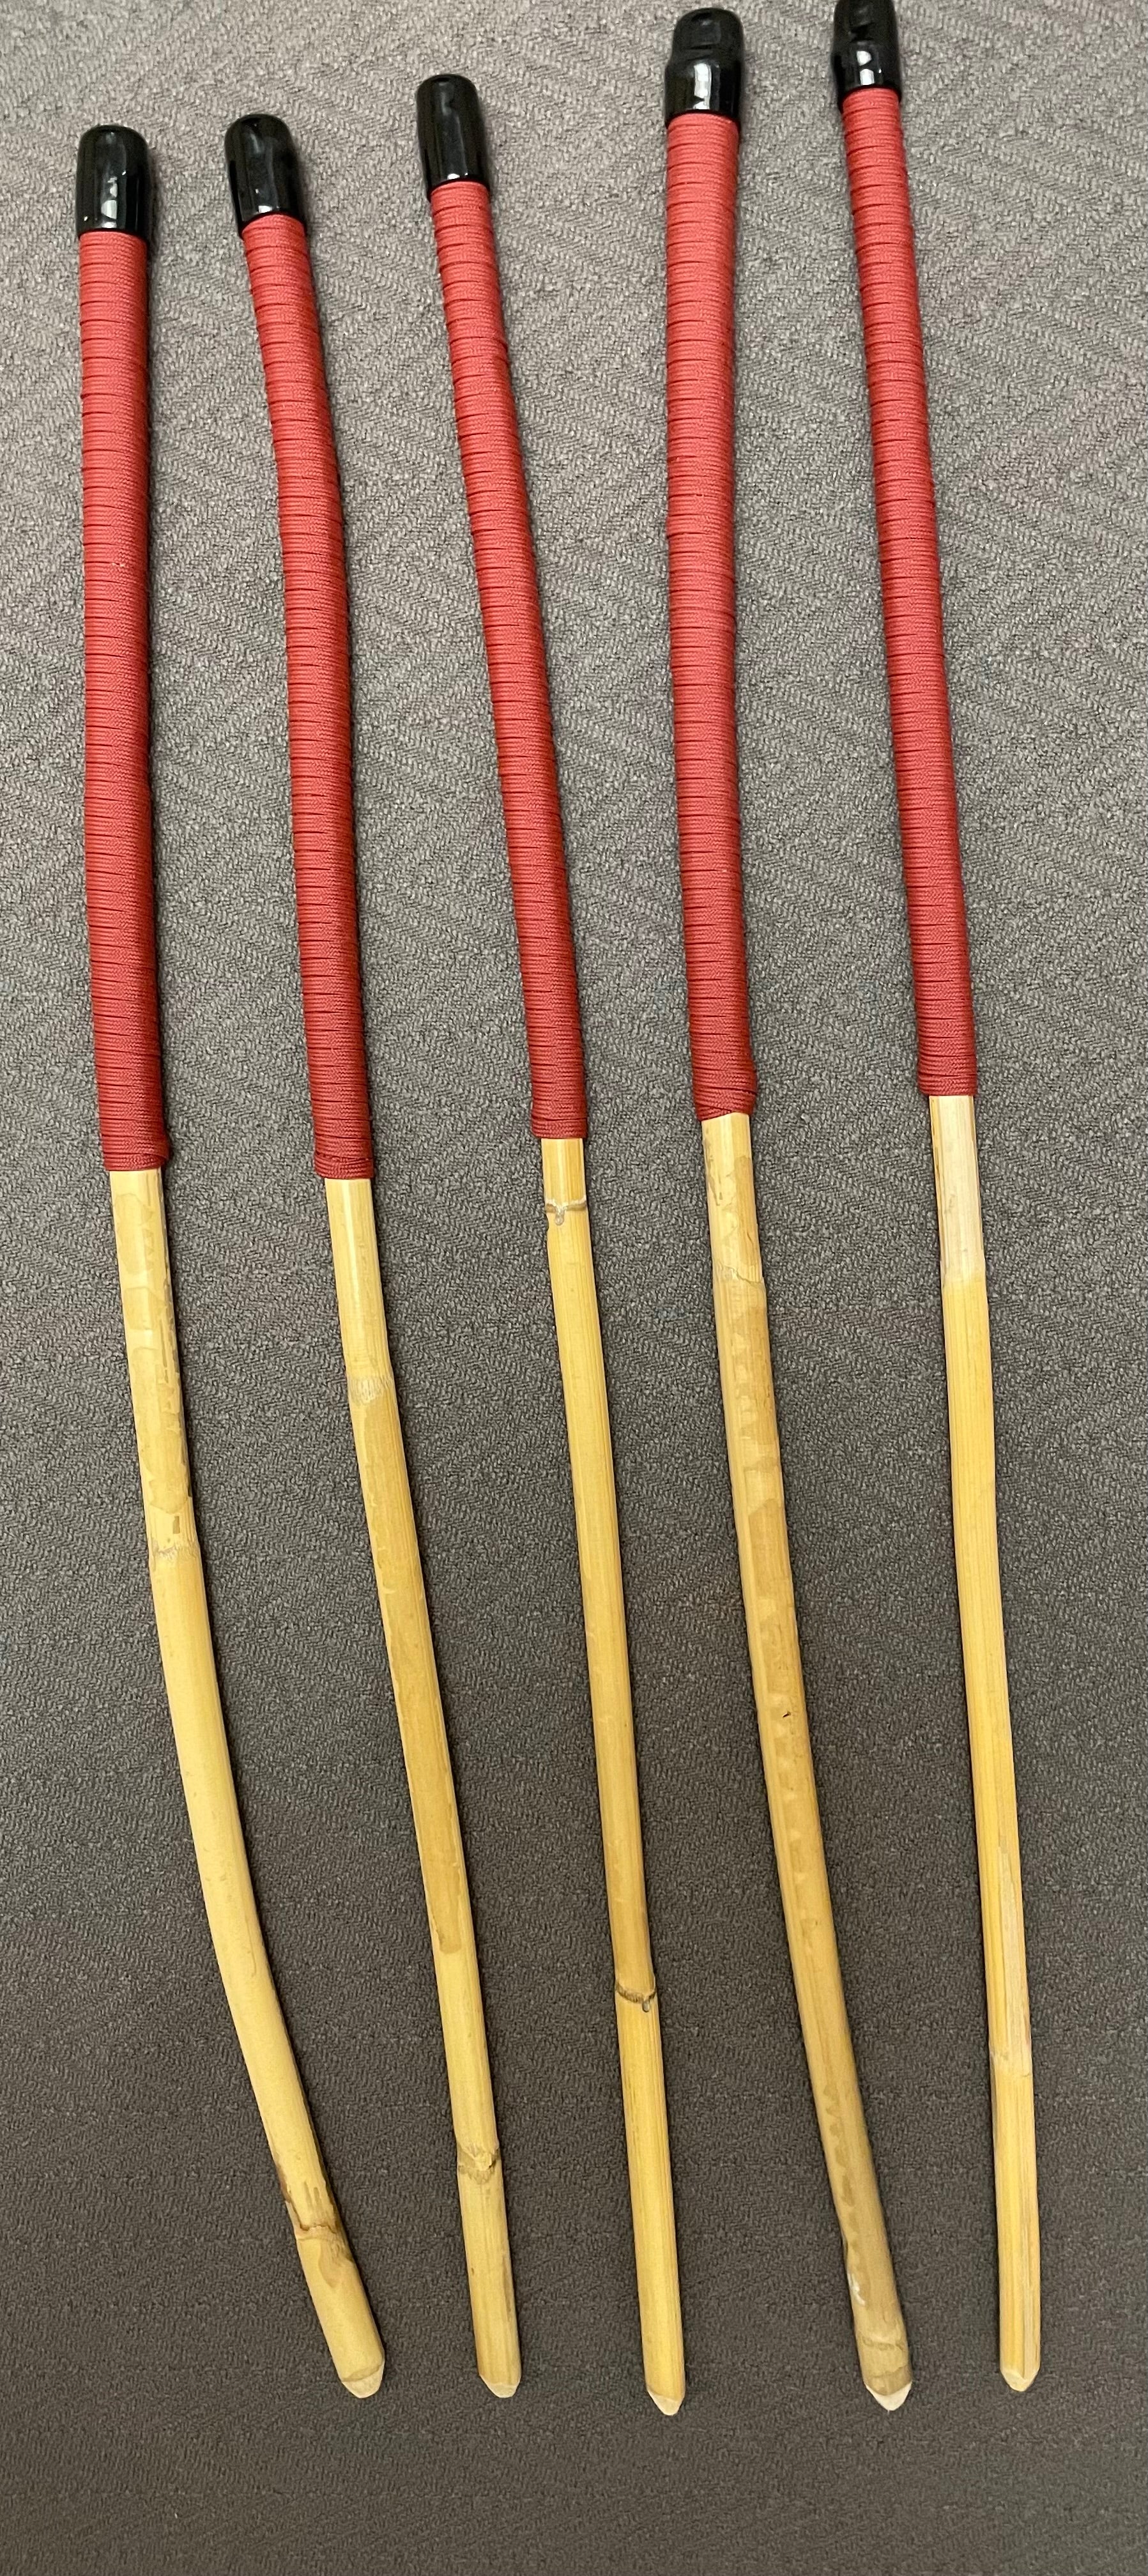 Set of 5 Classic Kooboo Rattan OTK Punishment canes with RED Paracord Handles - Over the Knee OTK Cane Set